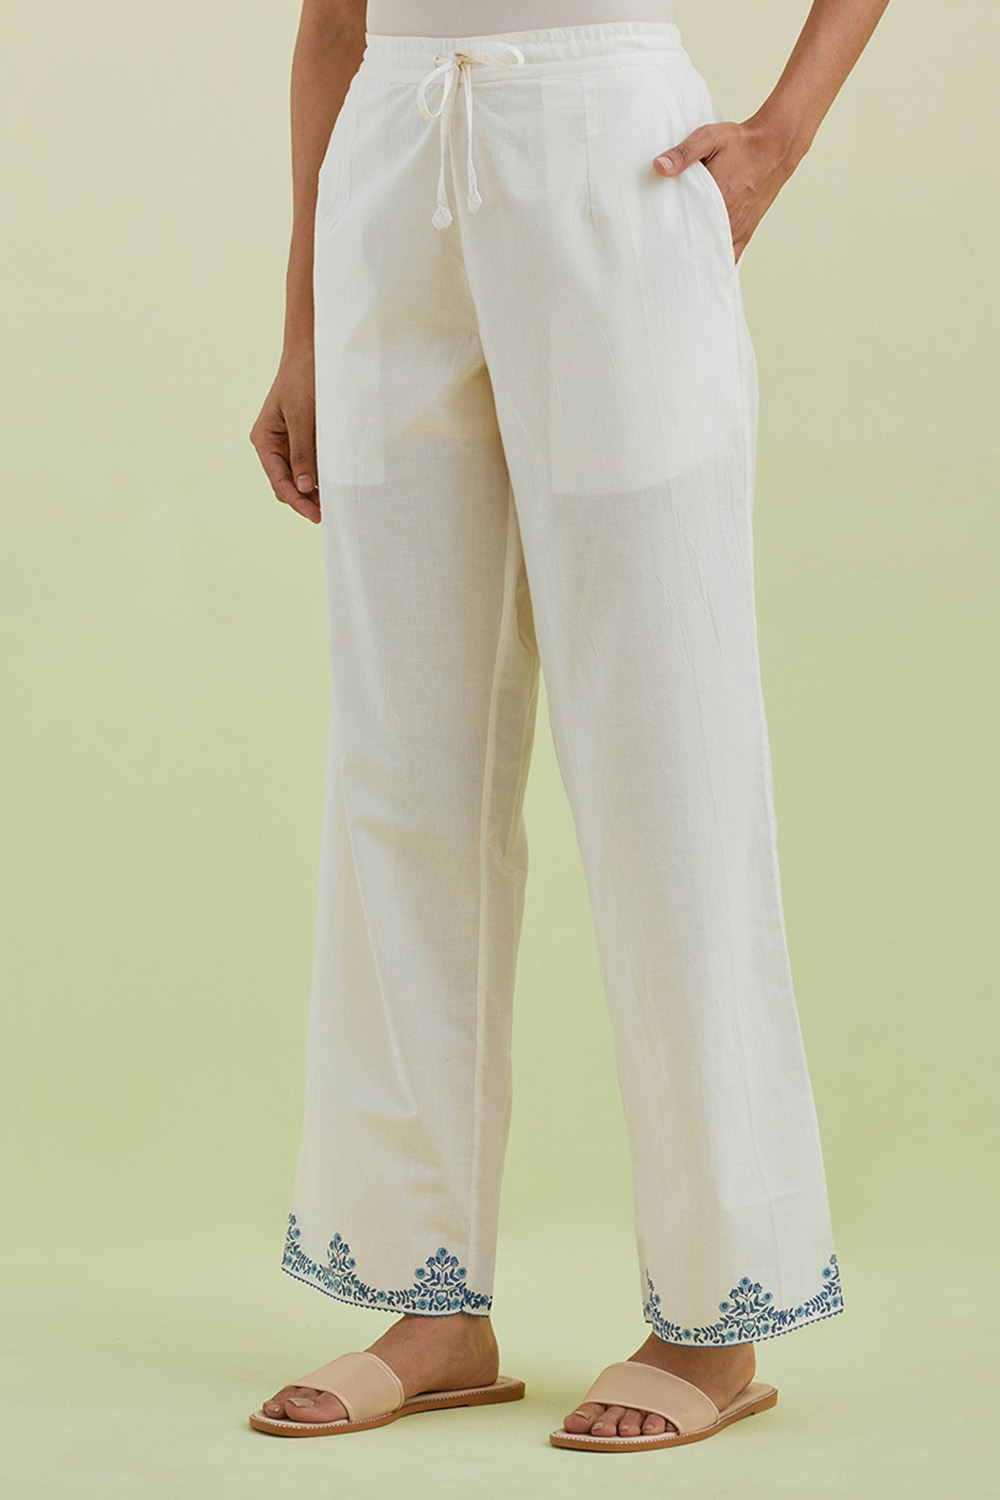 Off White Straight Pants With Blue Colored Hand-Block Printed Border At Hem